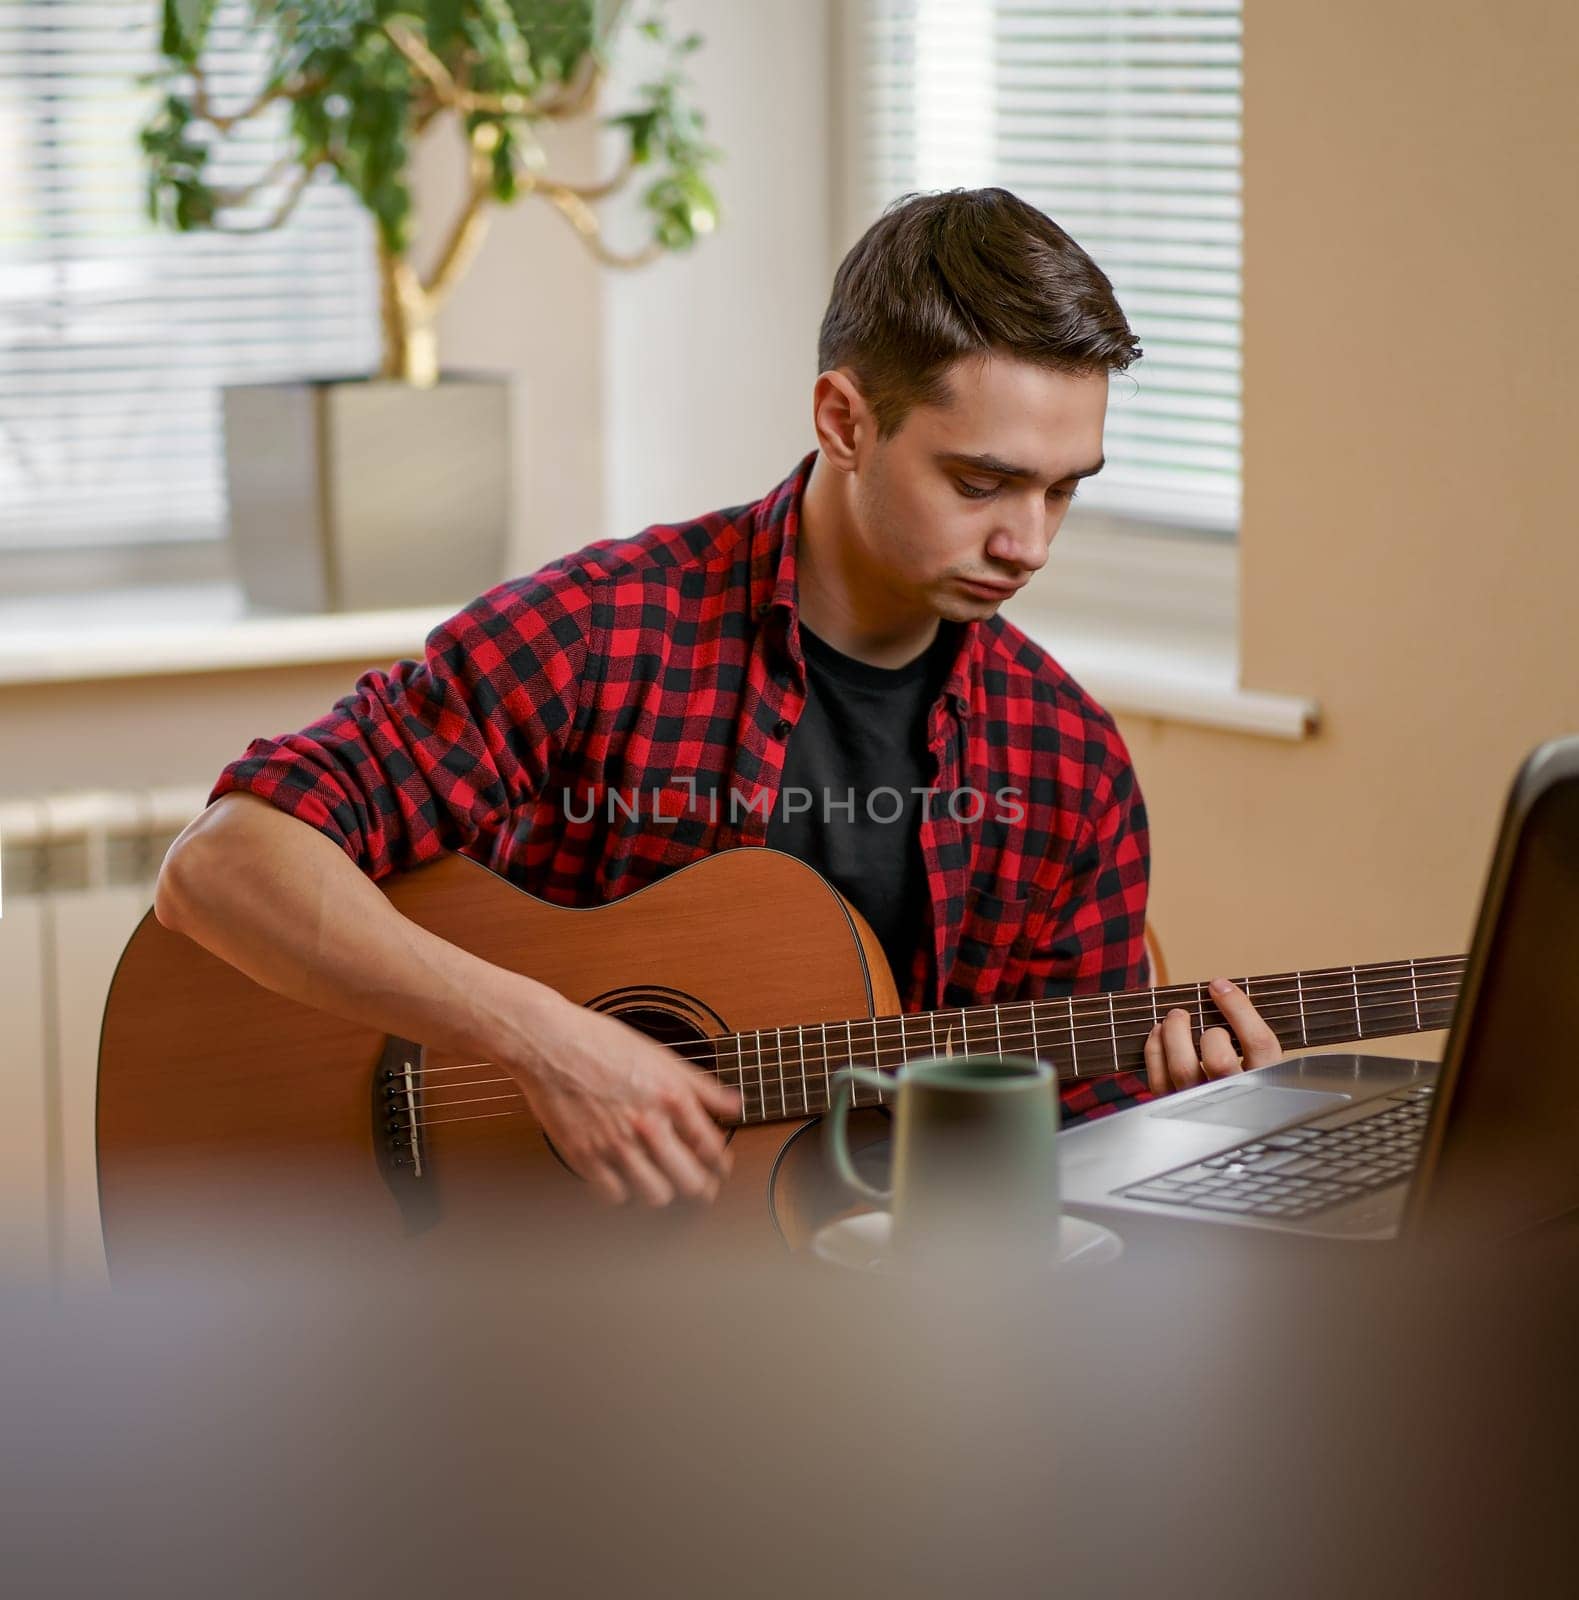 Relaxed man playing the guitar at home and using a laptop